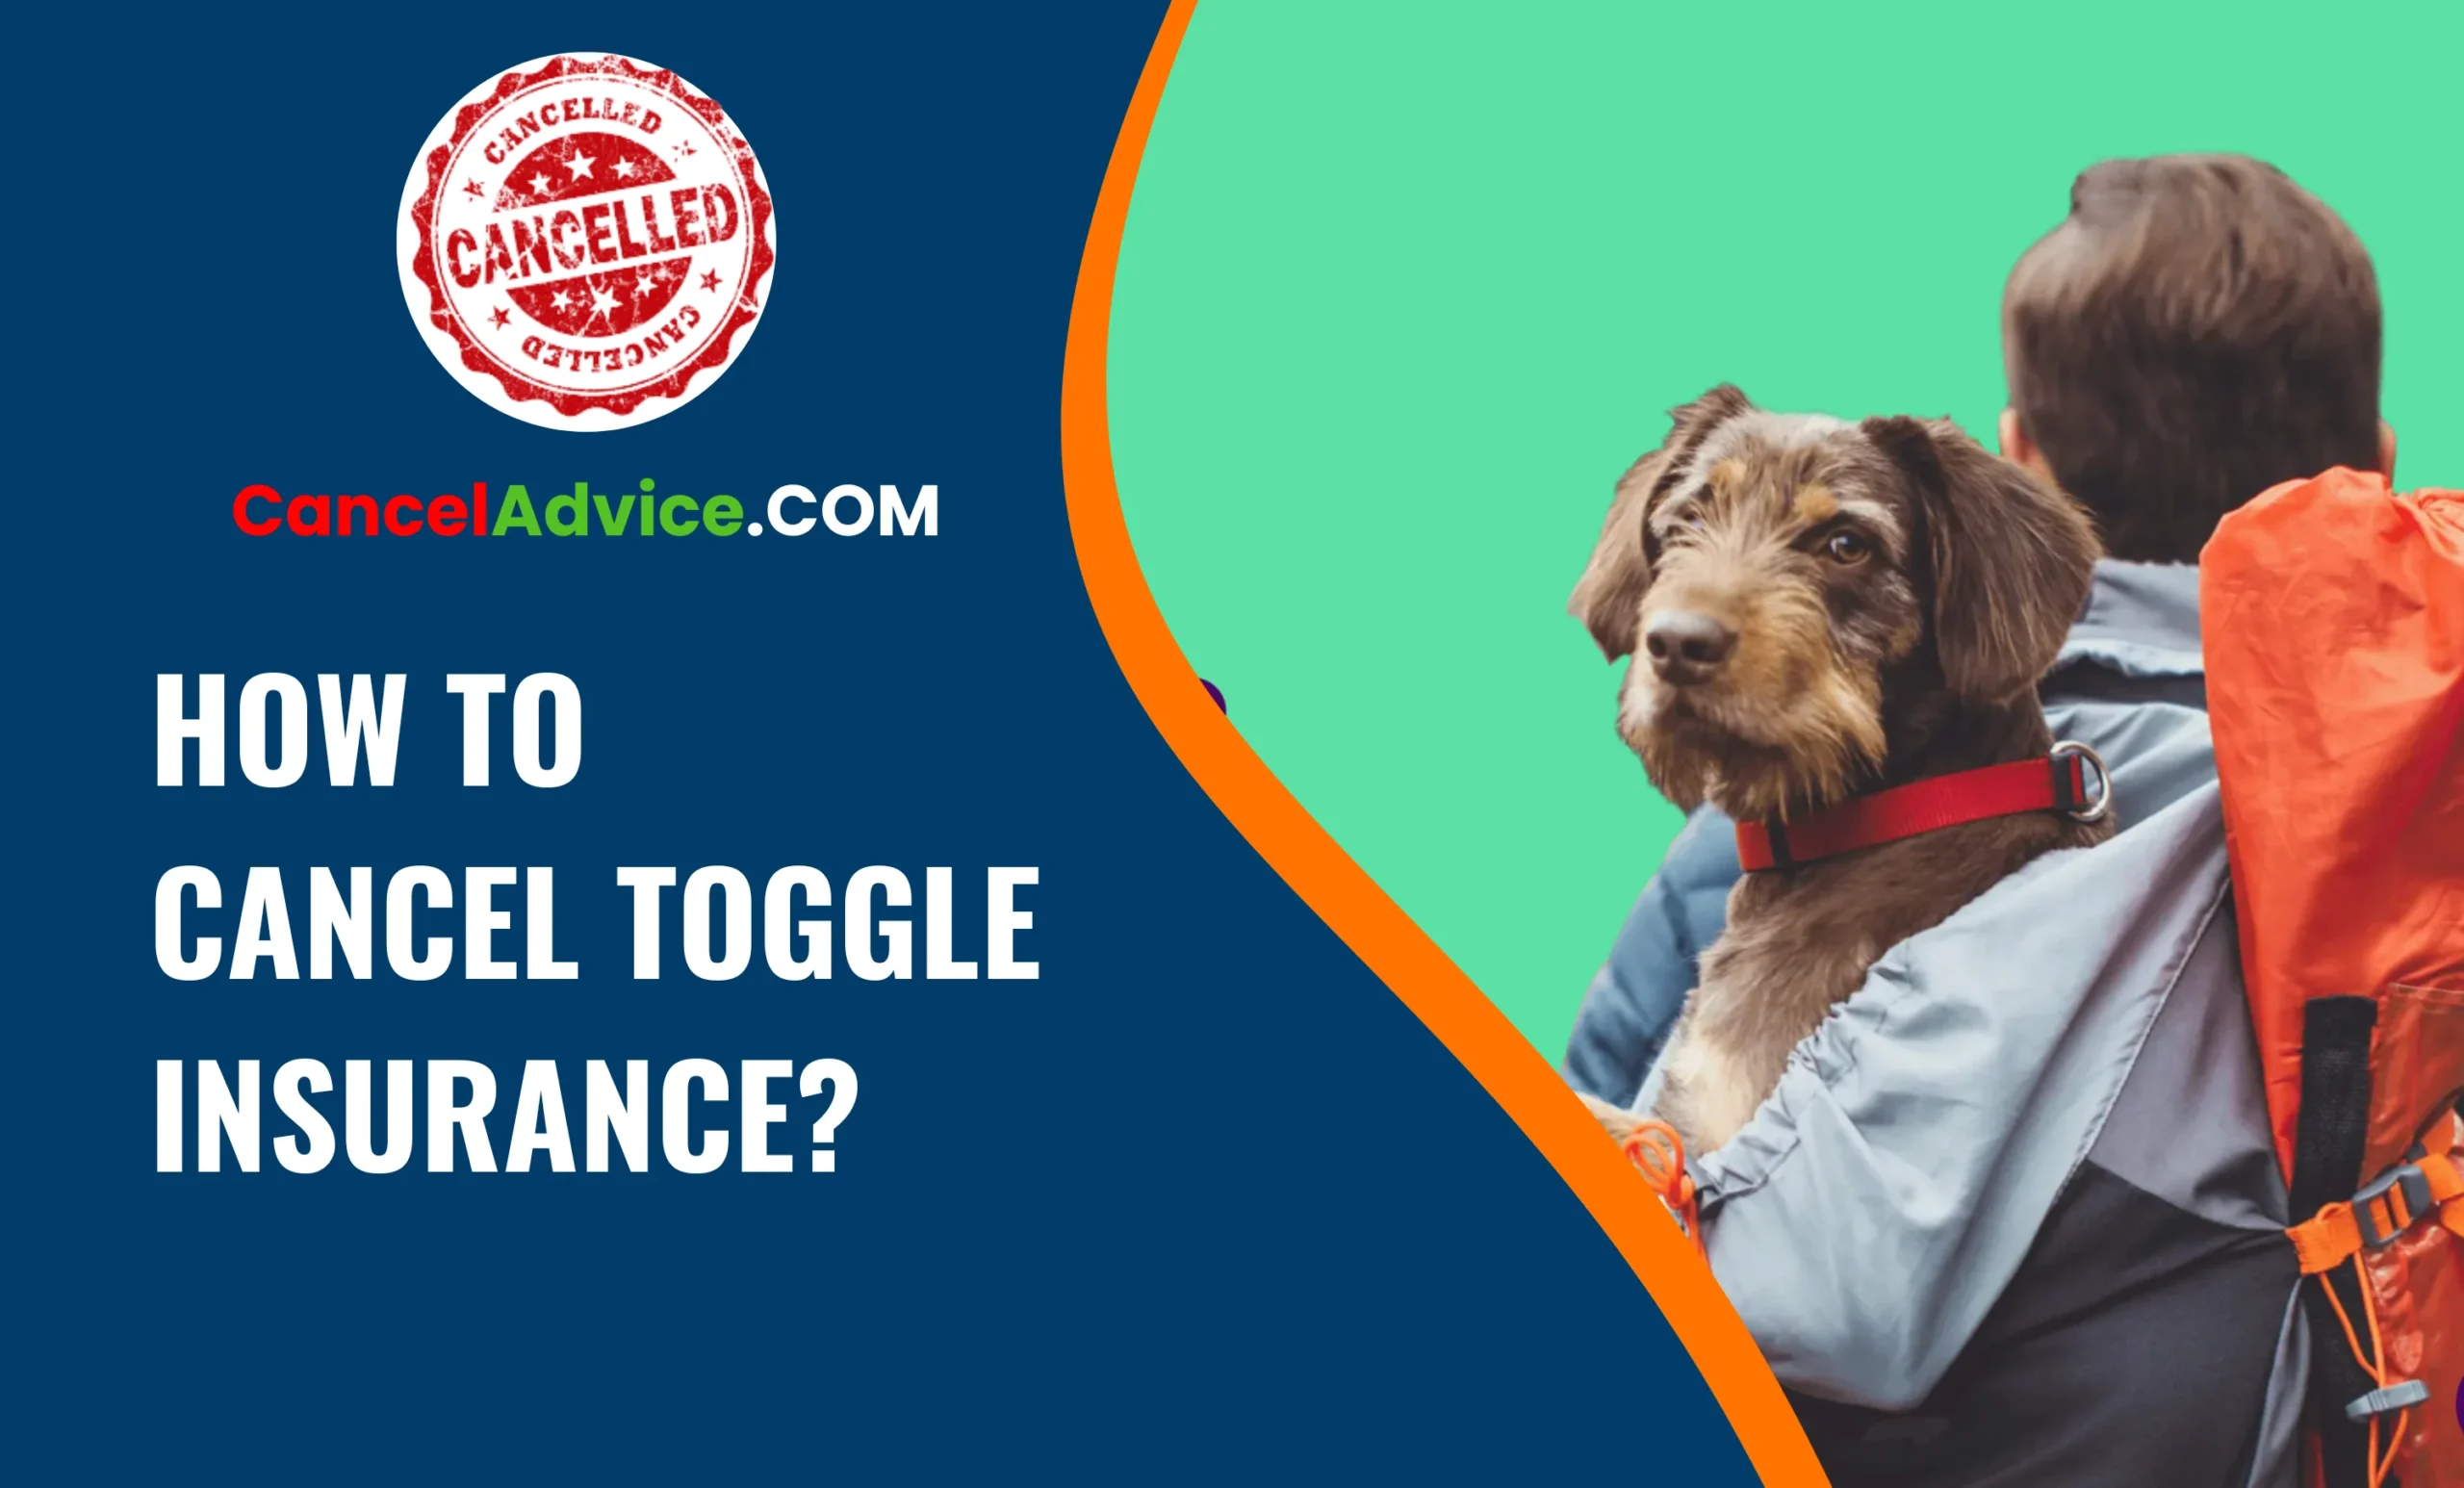 How To Cancel Toggle Insurance